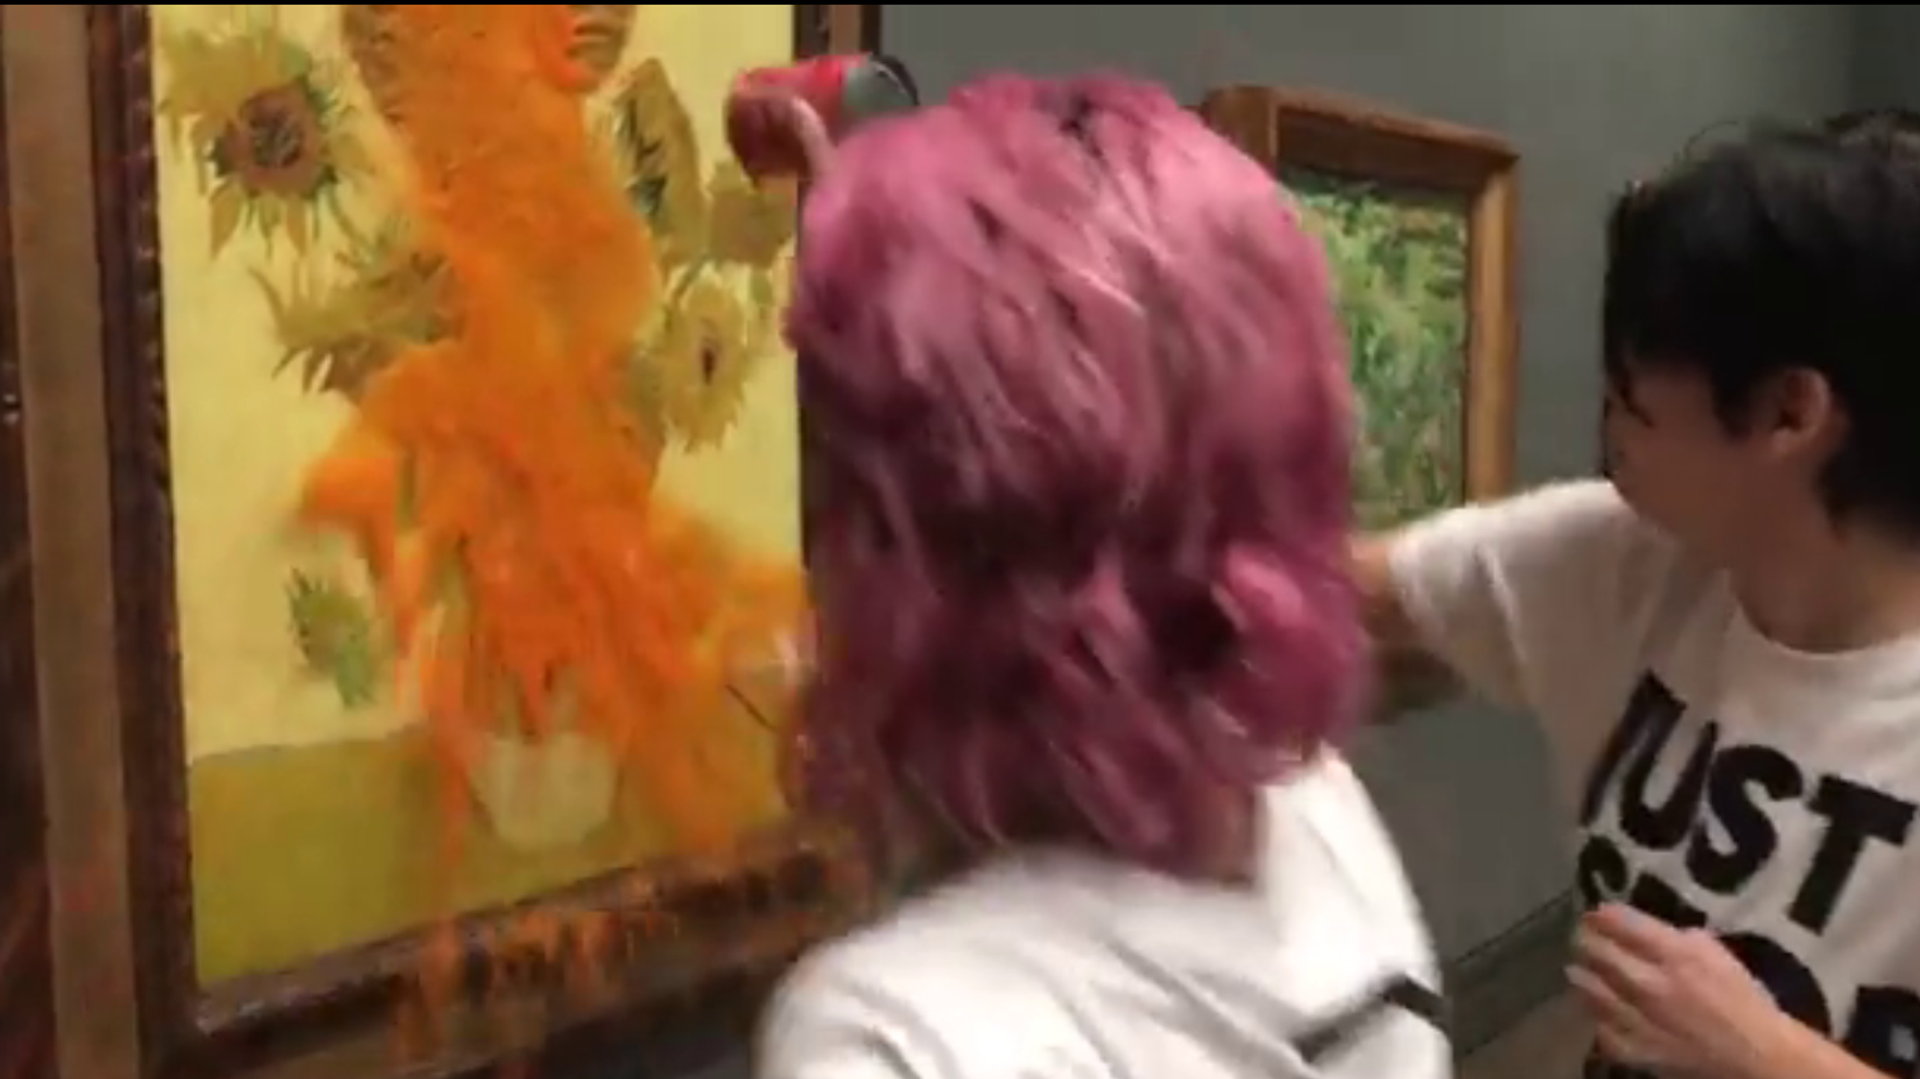 Eco-activists from the Just Stop Oil movement vandalized Van Gogh's Sunflowers painting at the National Gallery in London on October 14, 2022. - Sputnik International, 1920, 18.10.2022